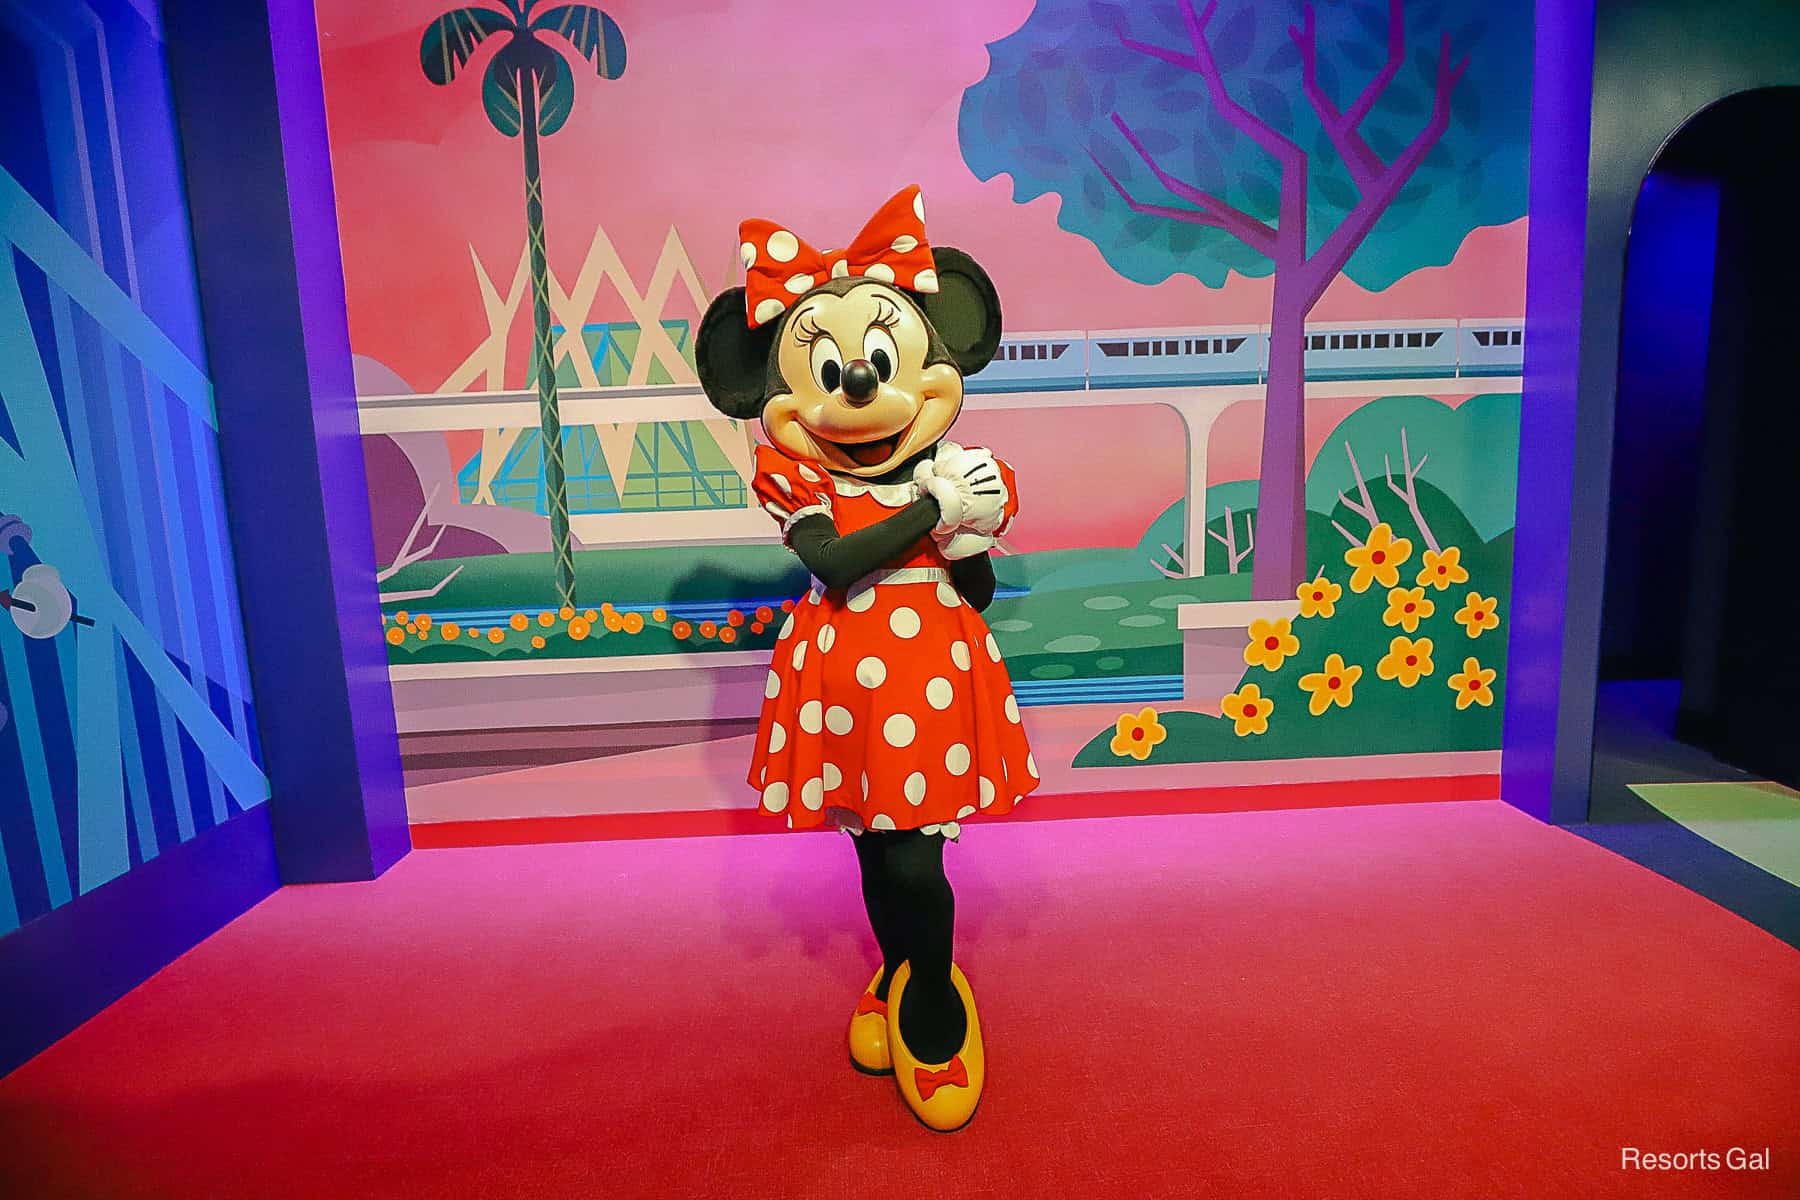 Minnie Mouse is wearing her red dress with white polka dots and yellow shoes with red bows. 